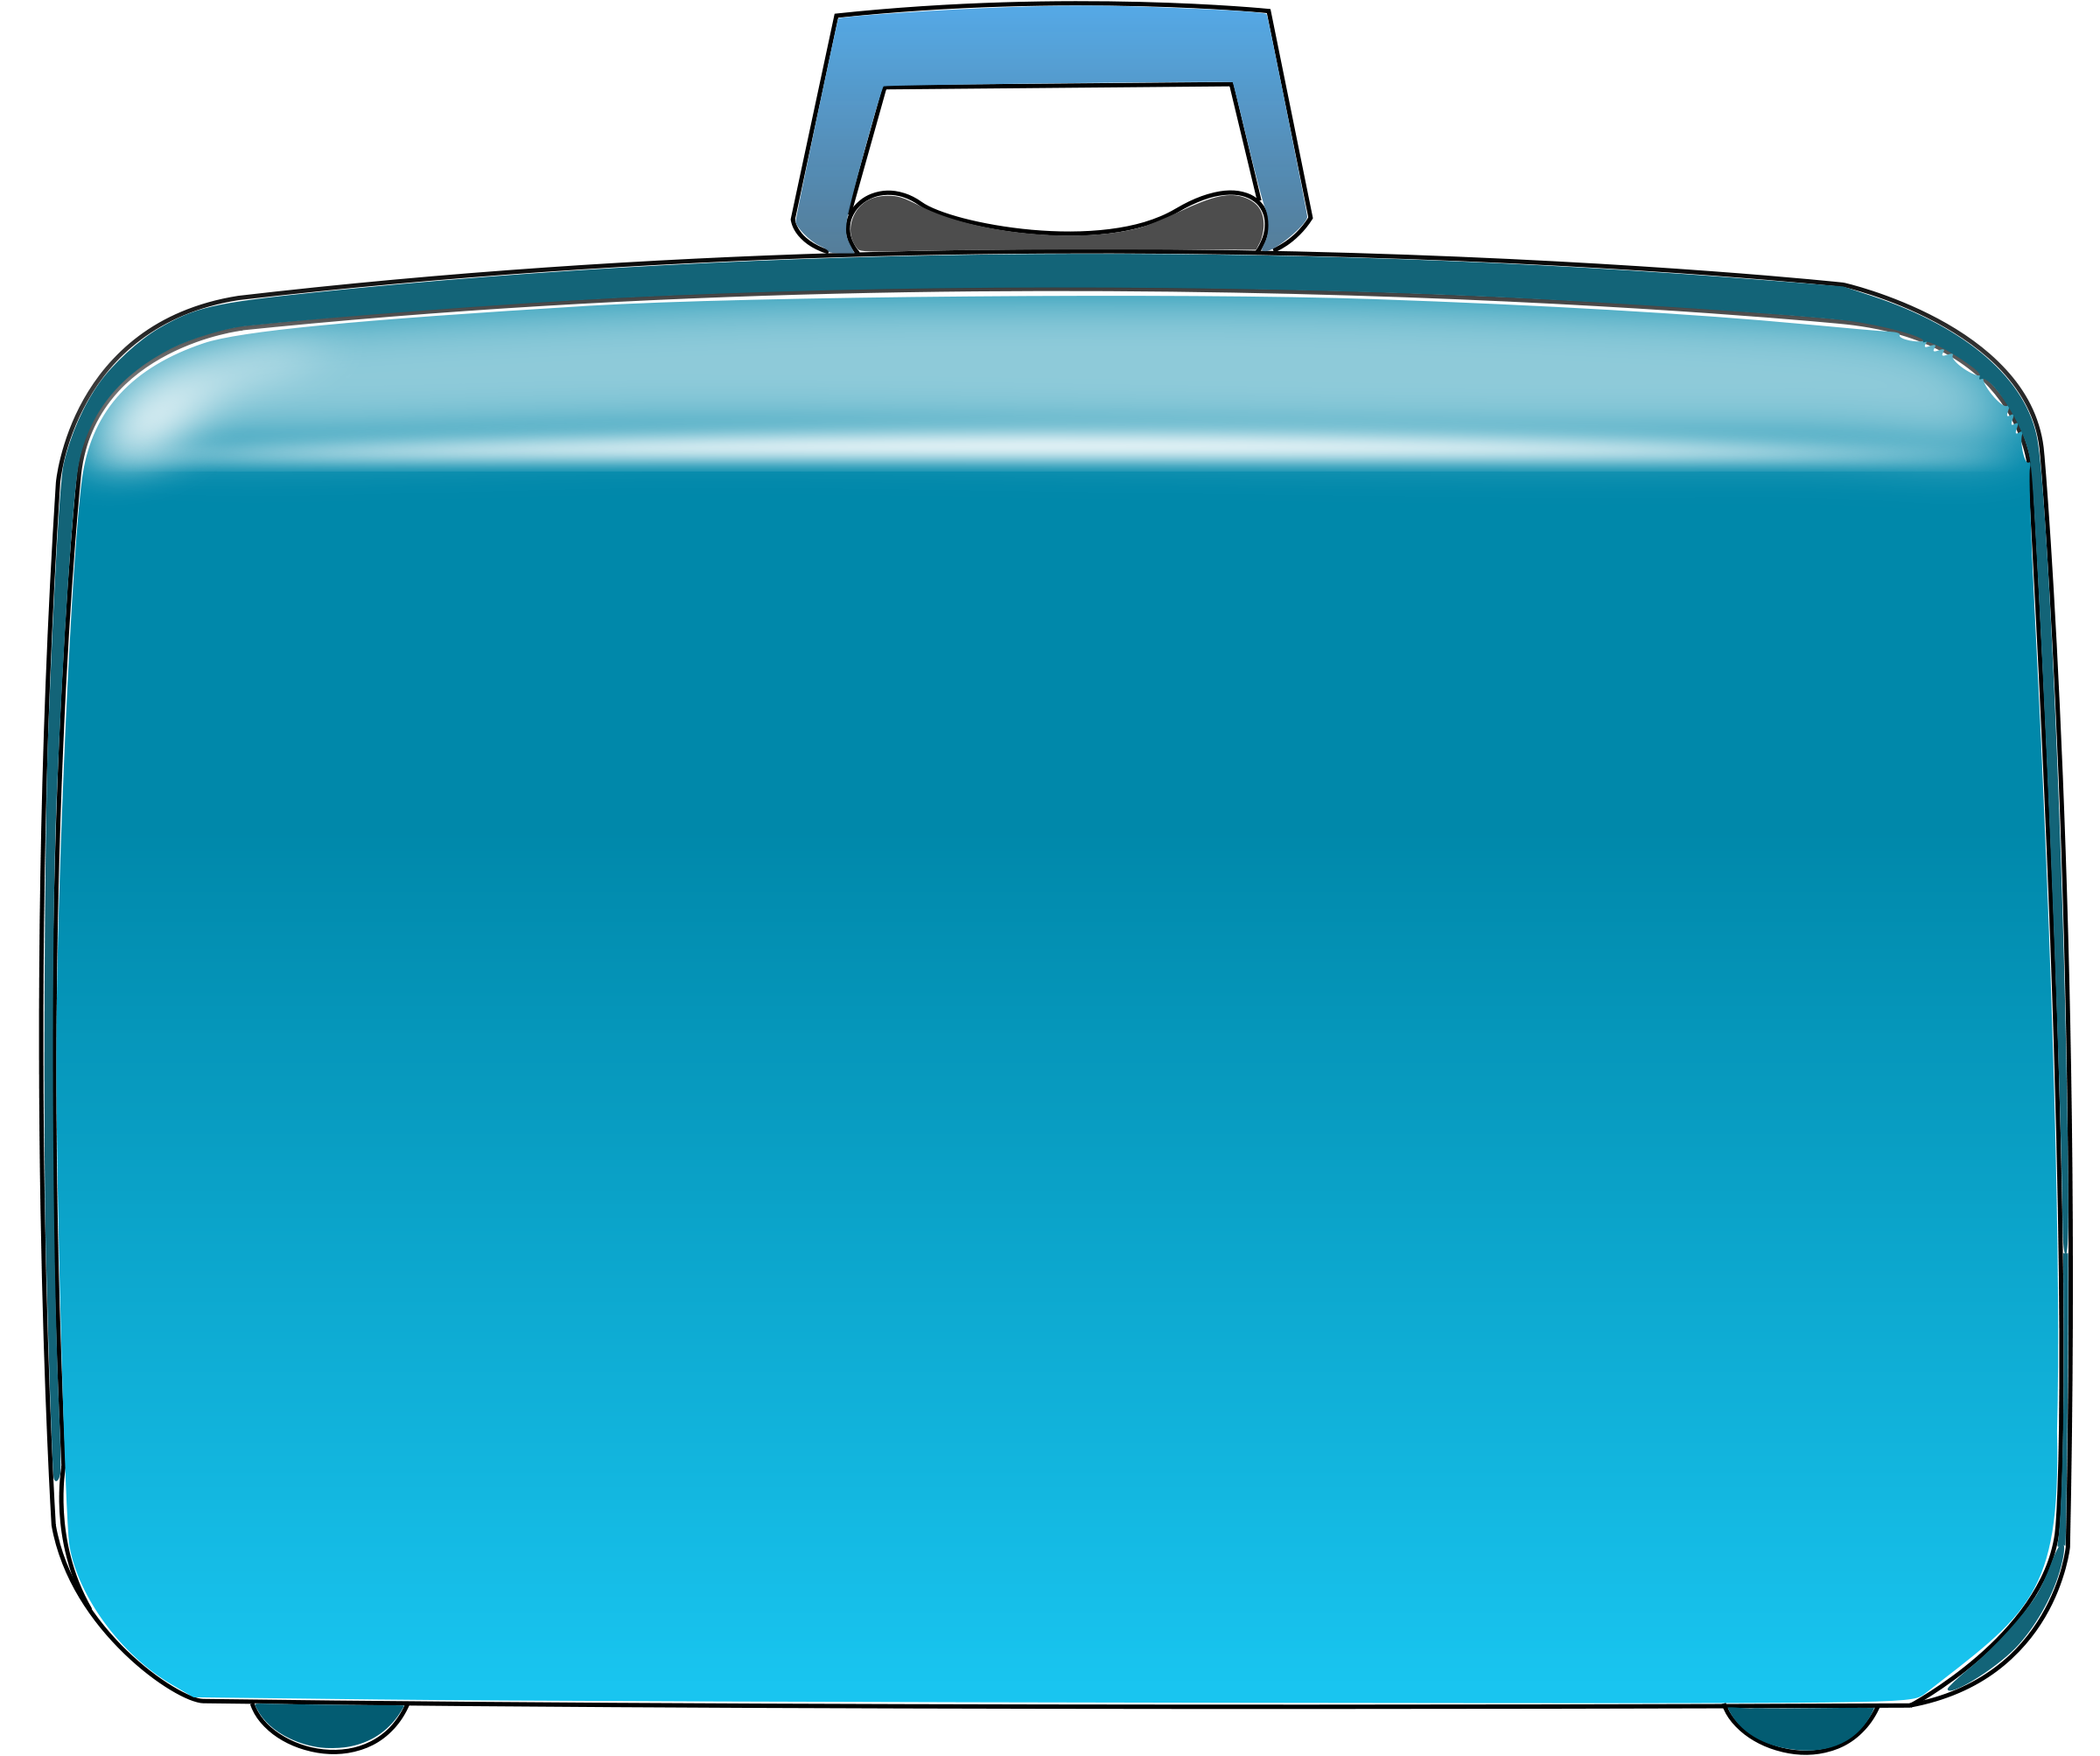 Luggage Clipart & Luggage Clip Art Images.